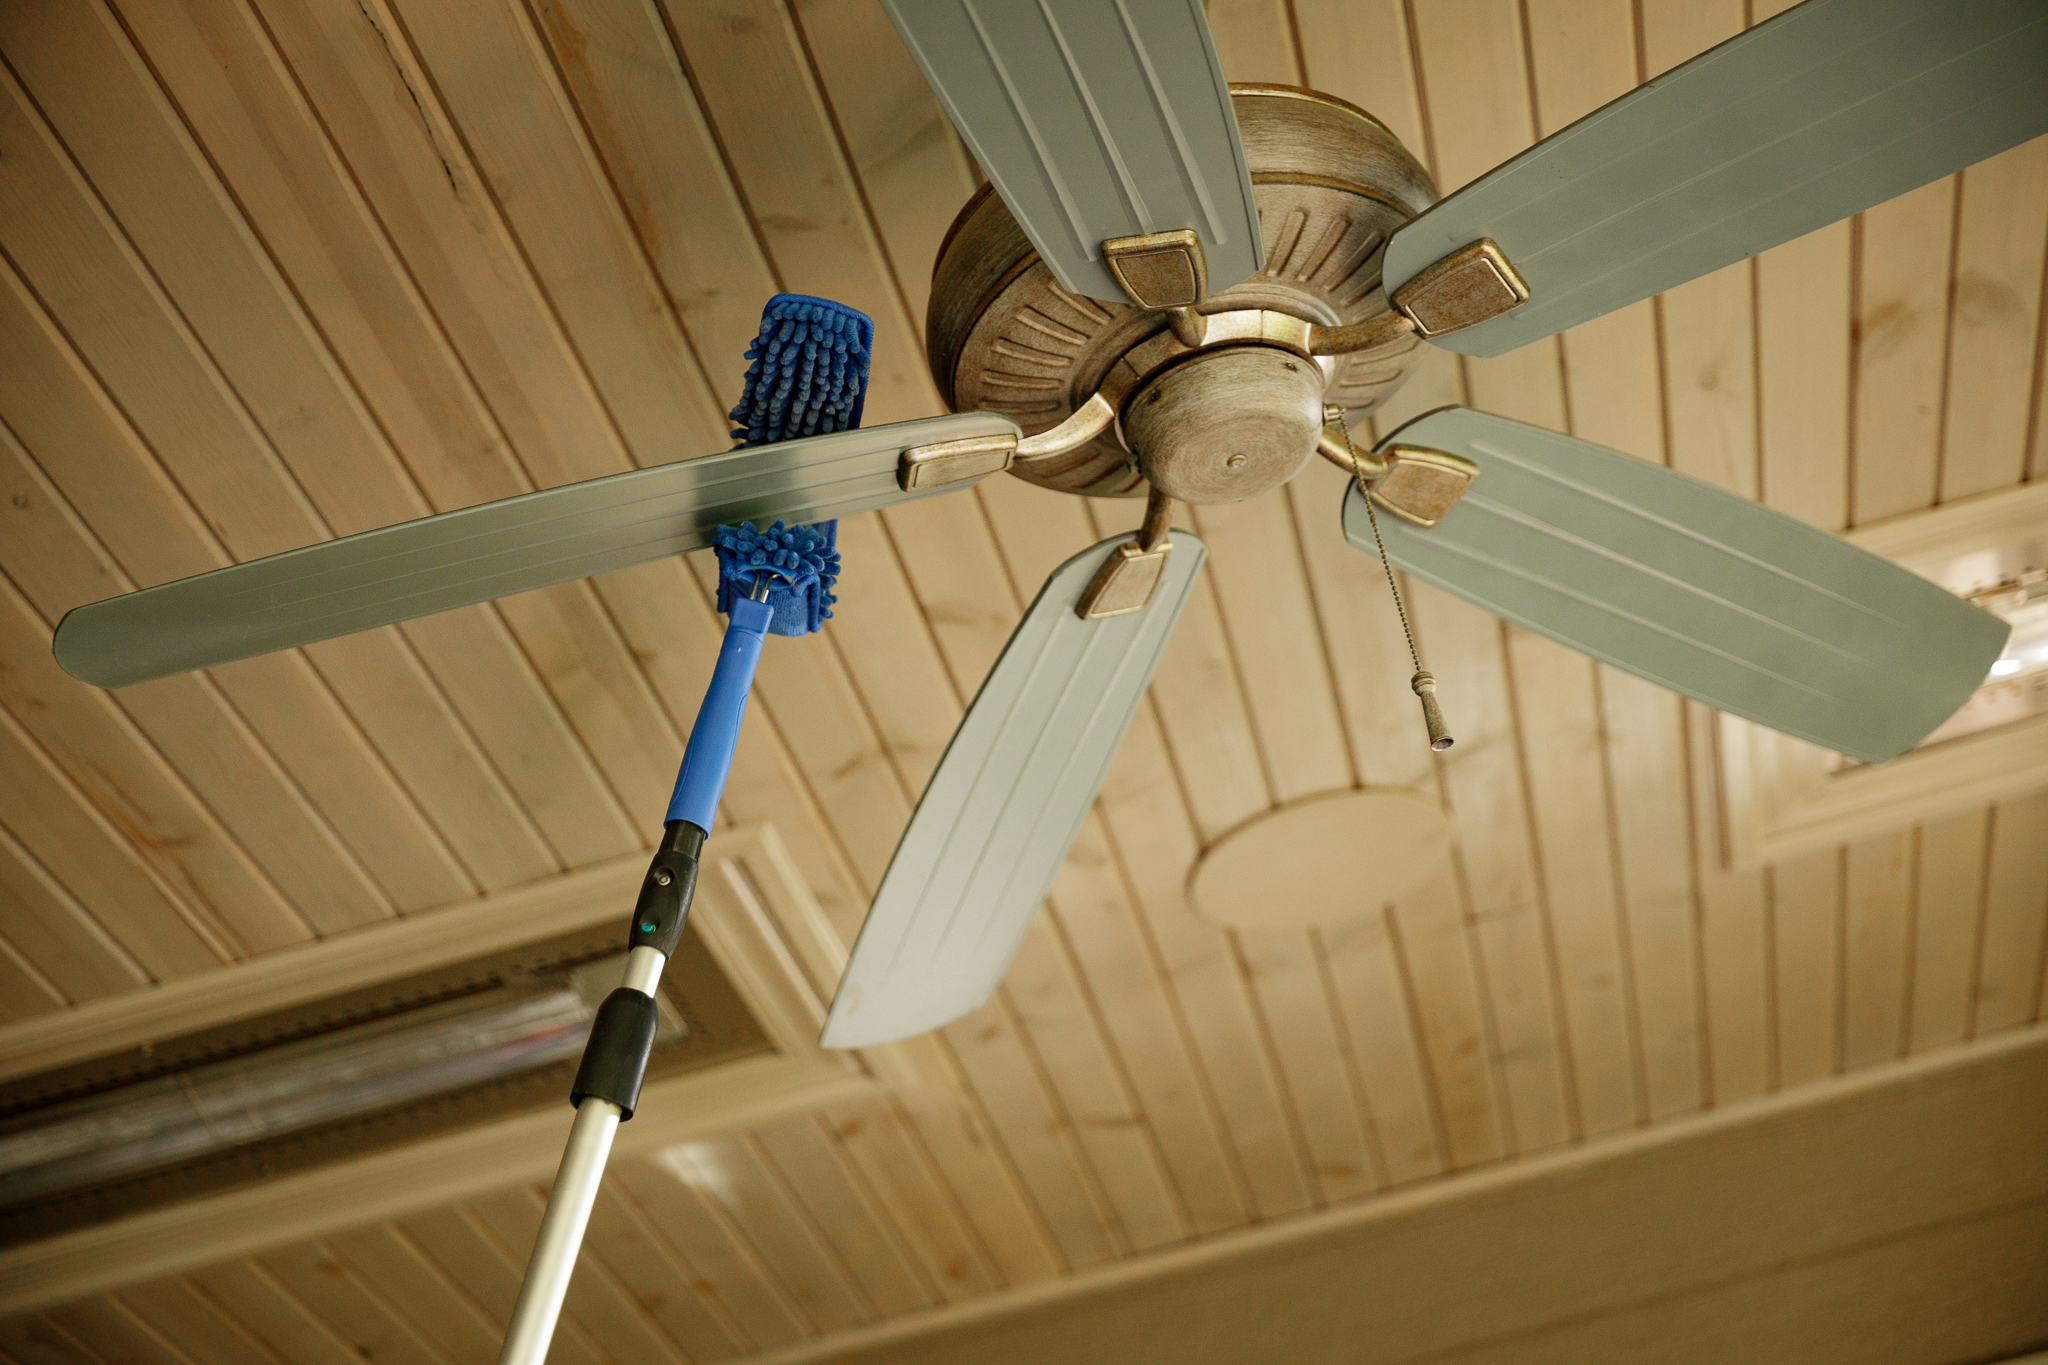 Ceiling Fan Being Cleaned with a Blue Pad